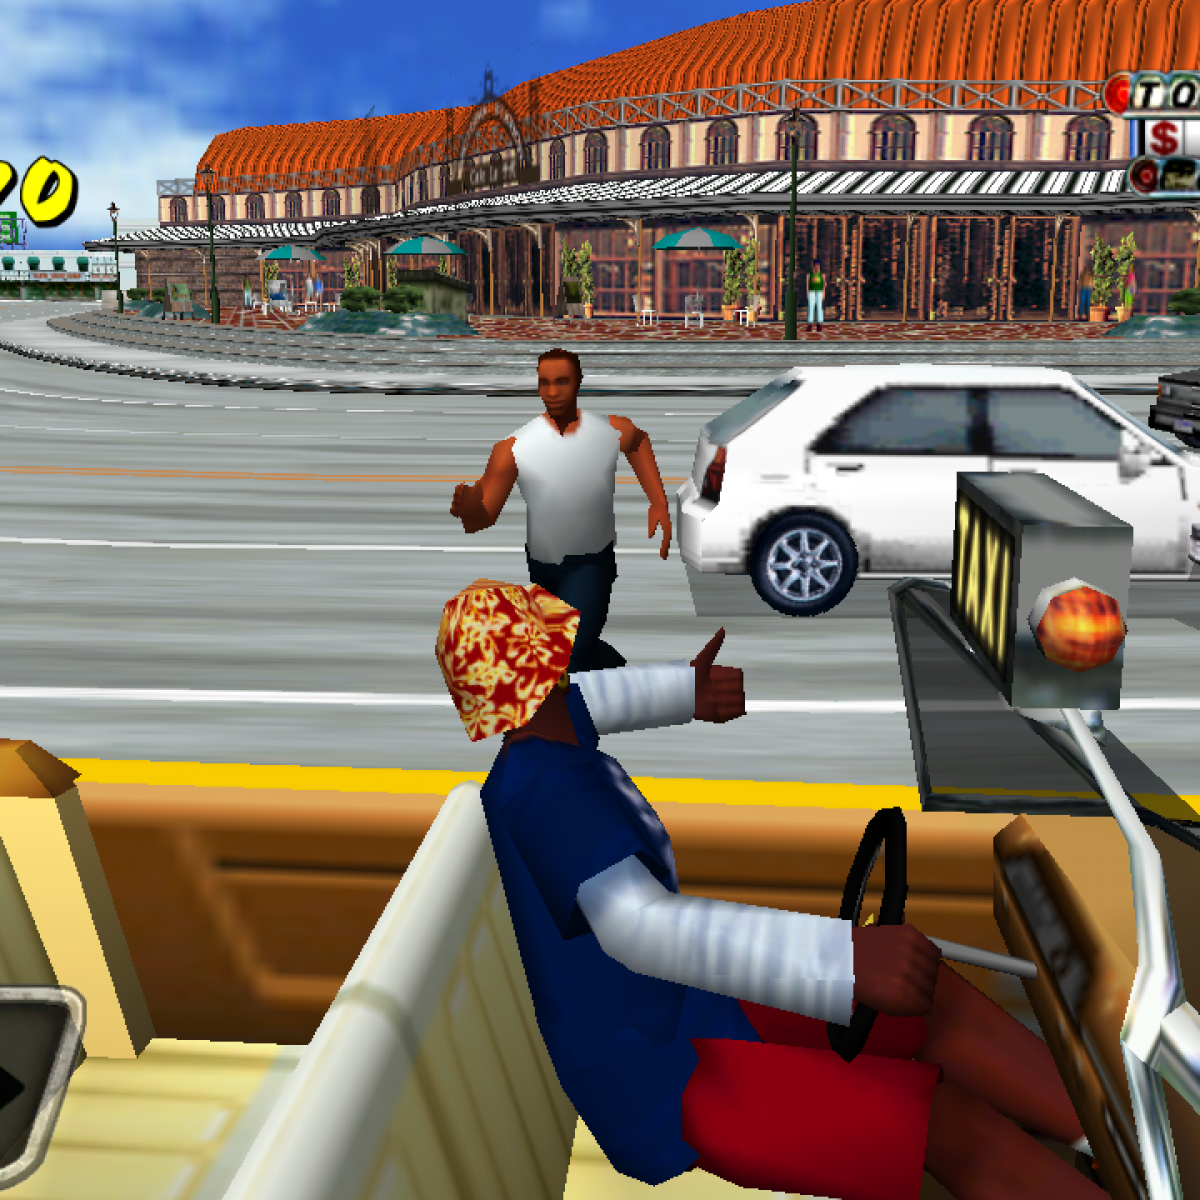 Crazy Taxi Driver: Taxi Game - Apps on Google Play